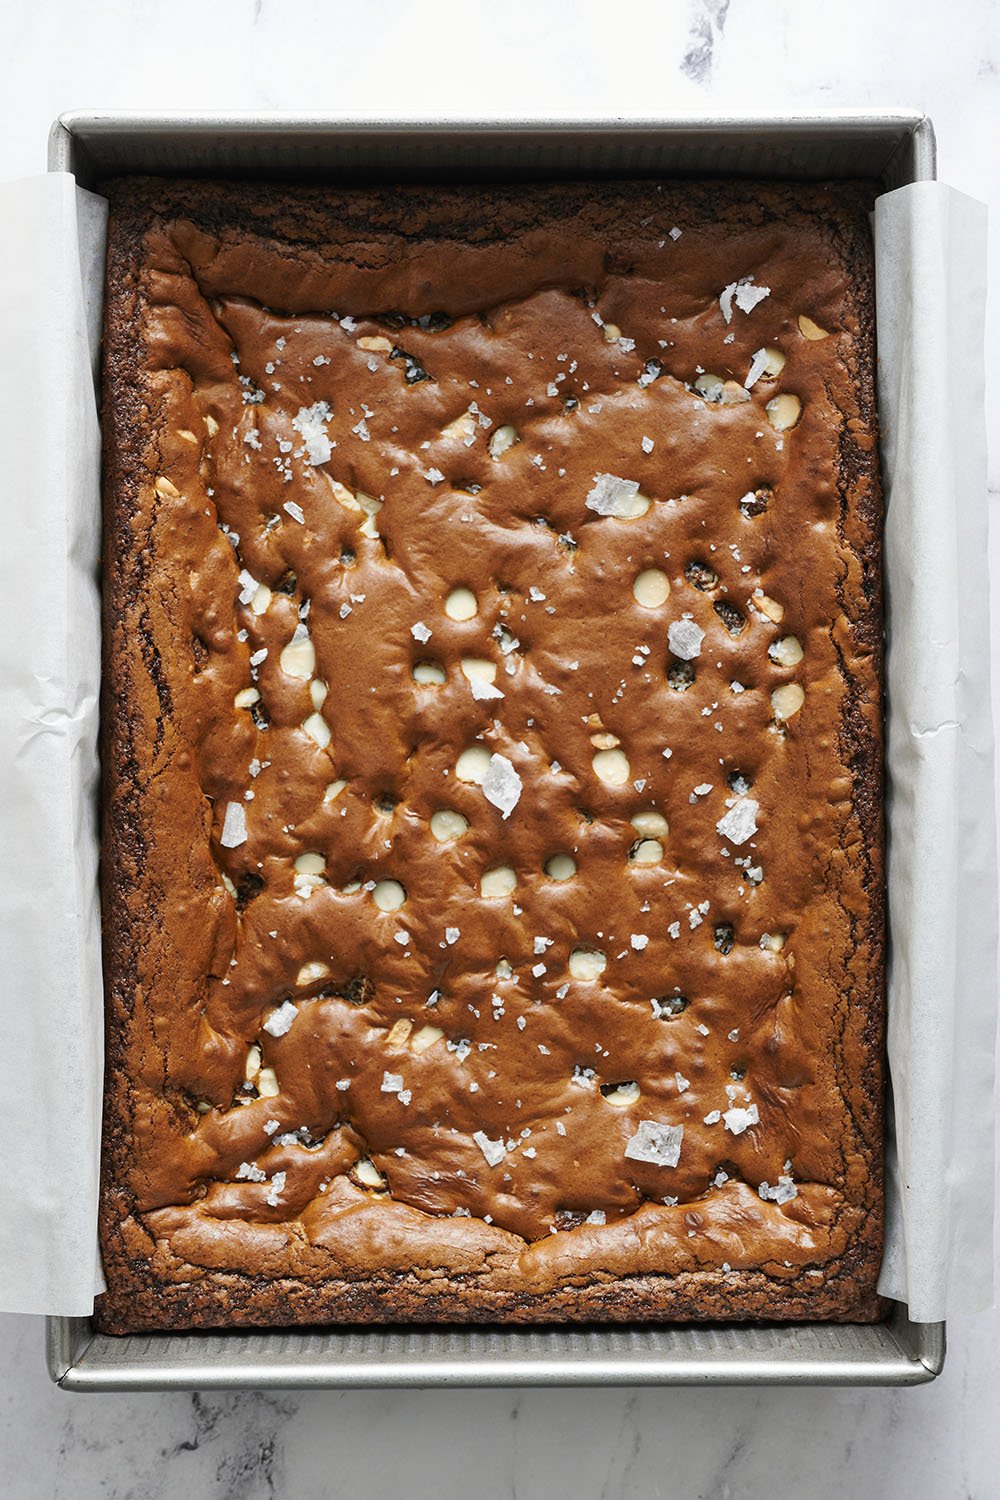 Freshly baked Gingerbread White Chocolate Blondies in a 9x13 pan with a little flaky sea salt on top.